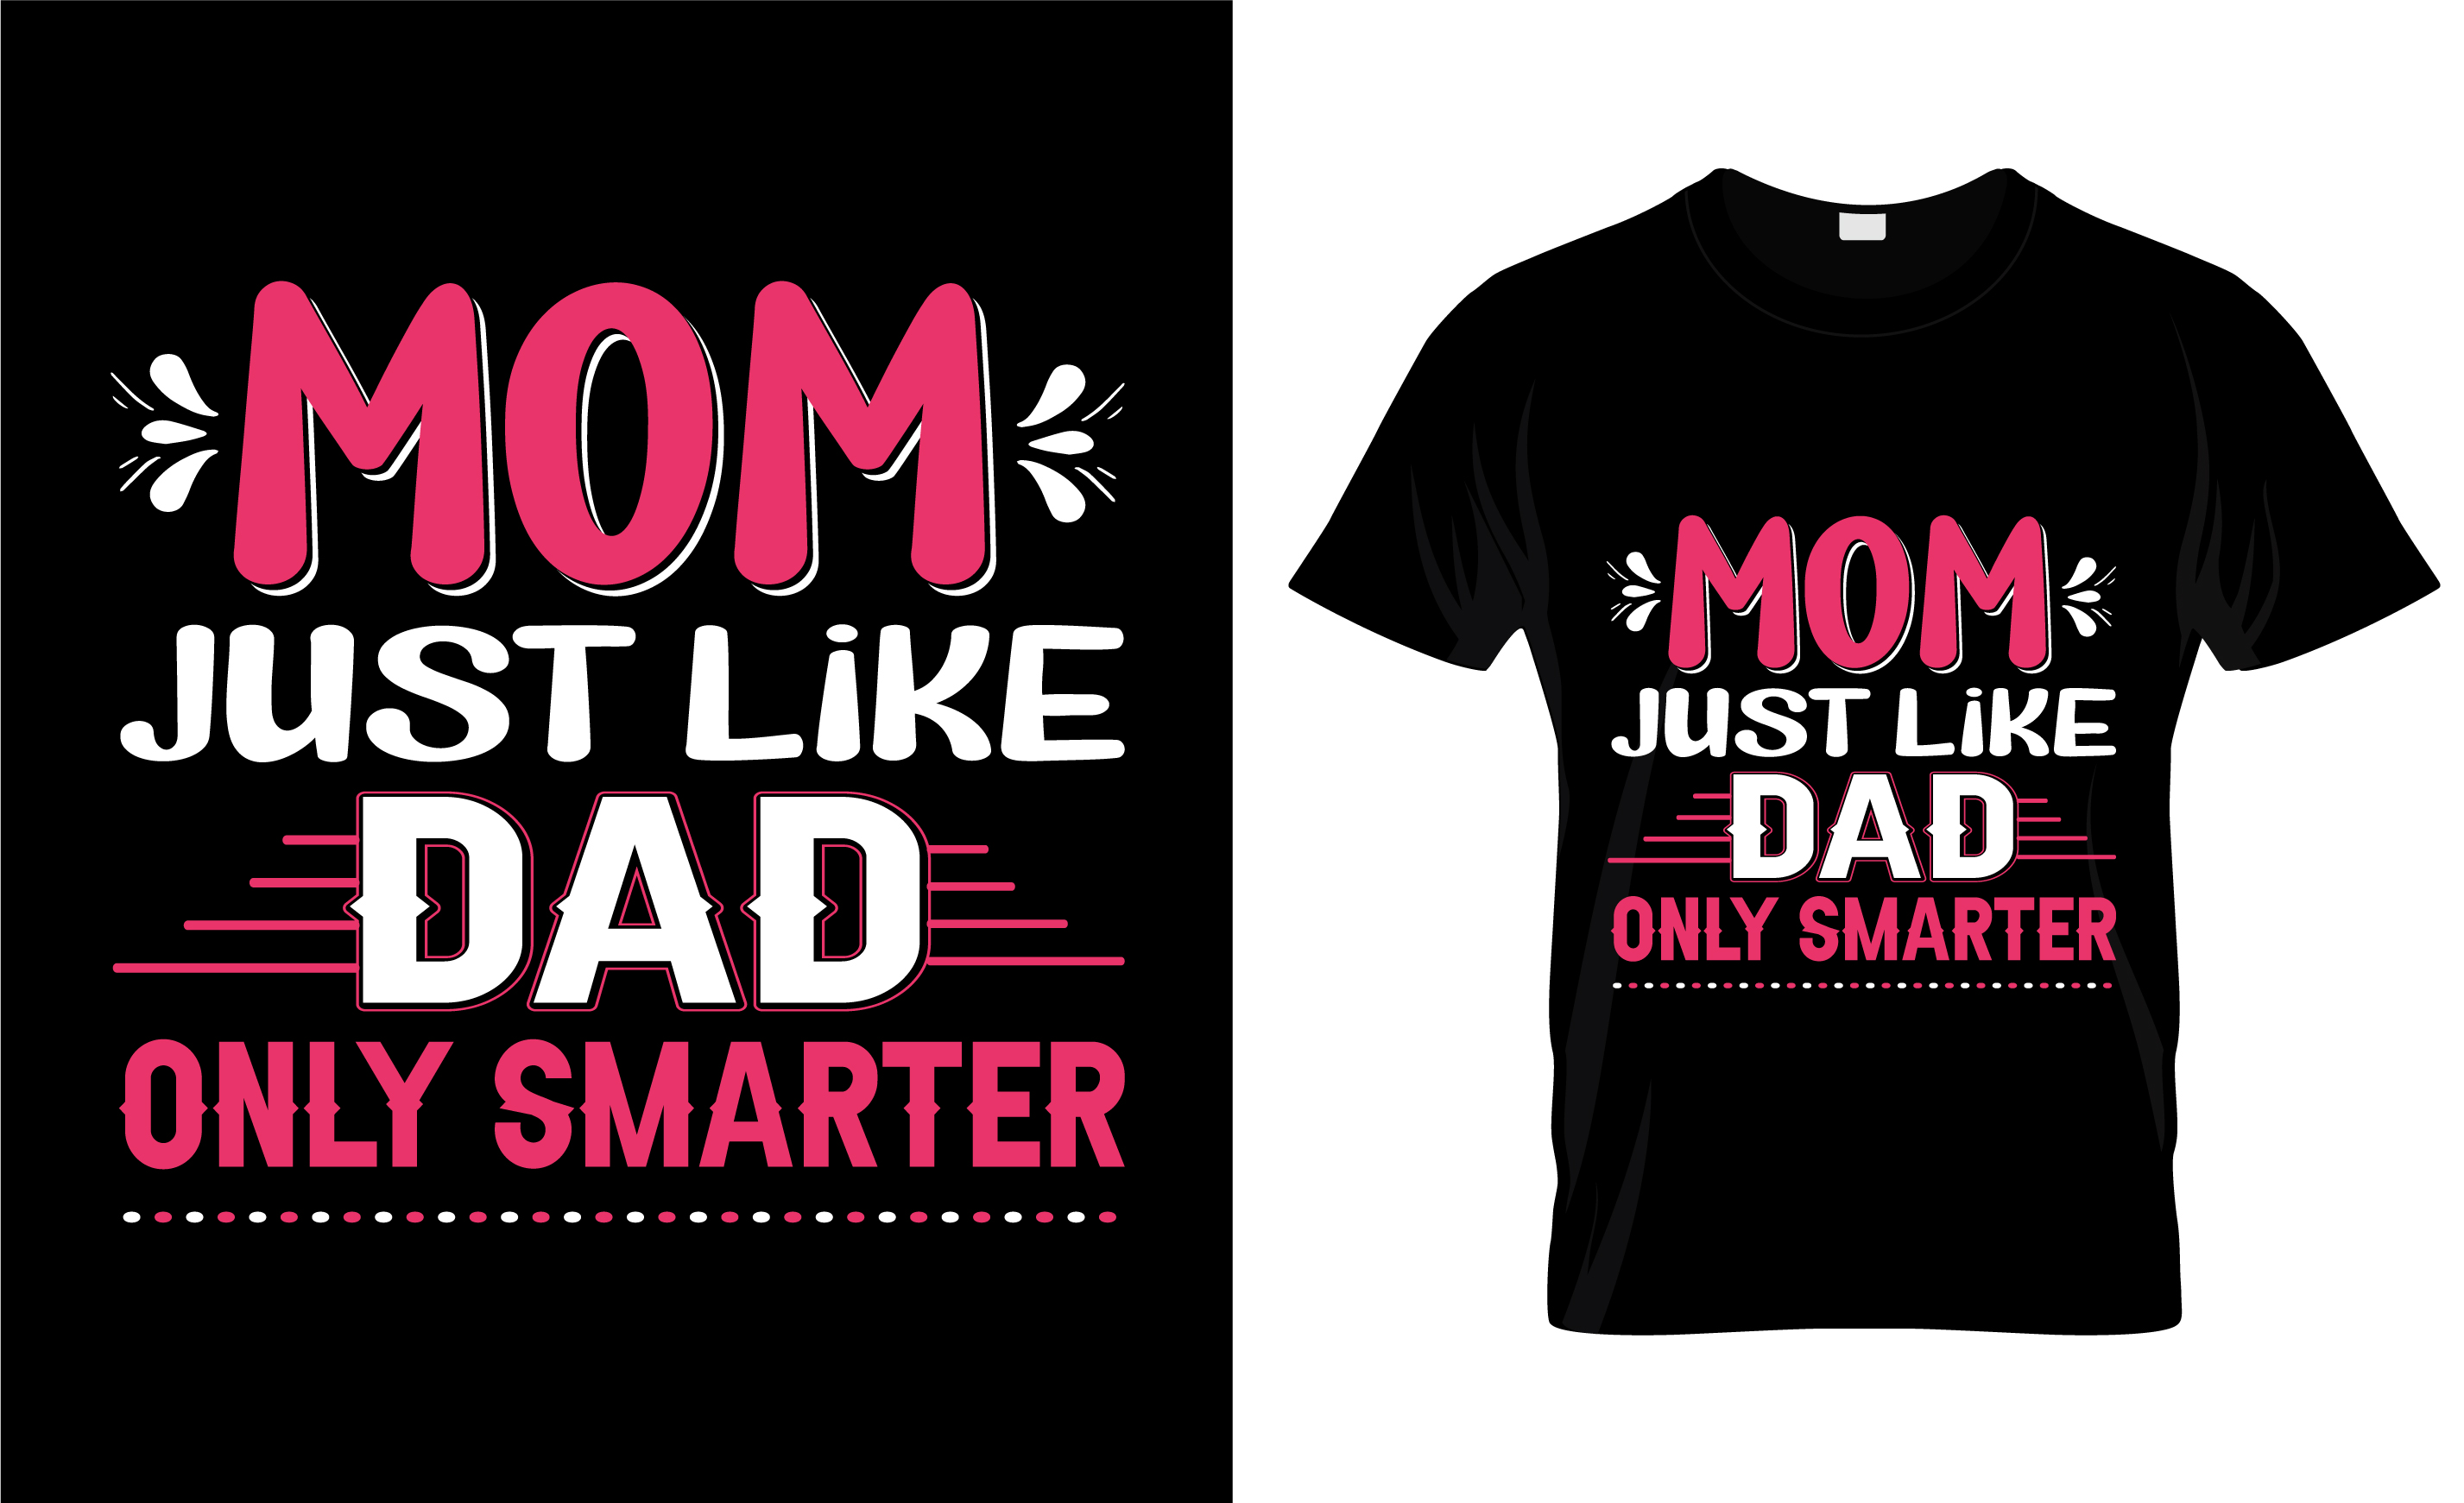 Image of a black t-shirt with an irresistible print of red and white about mom.